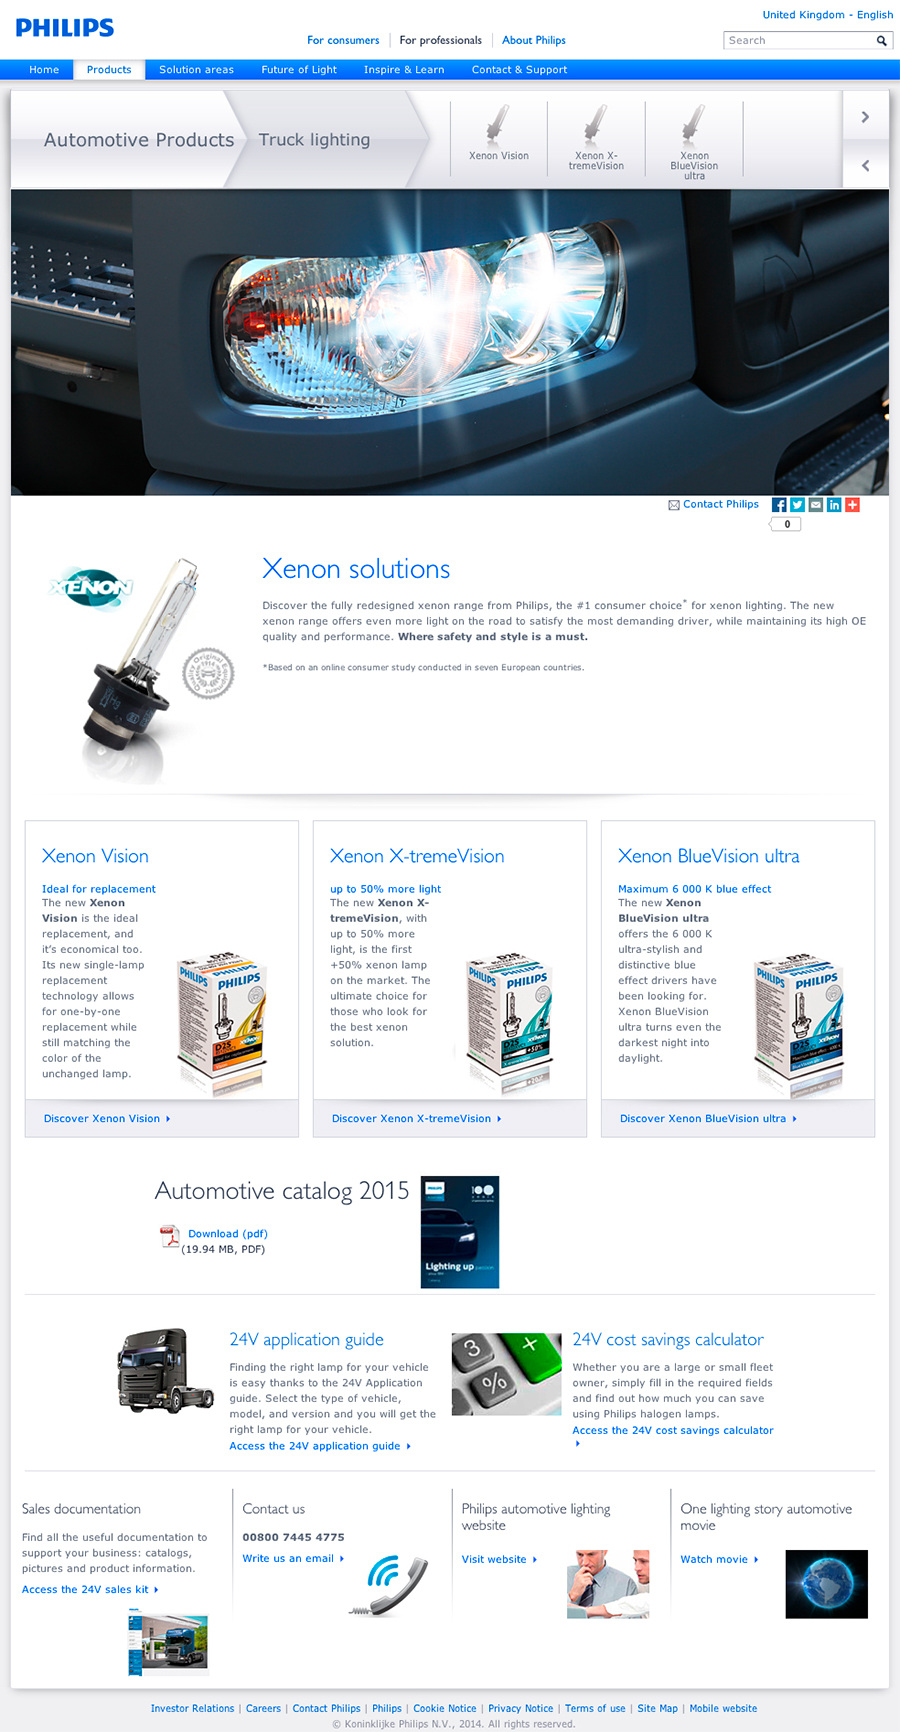 Philips automotive professional website - Xenon solutions section